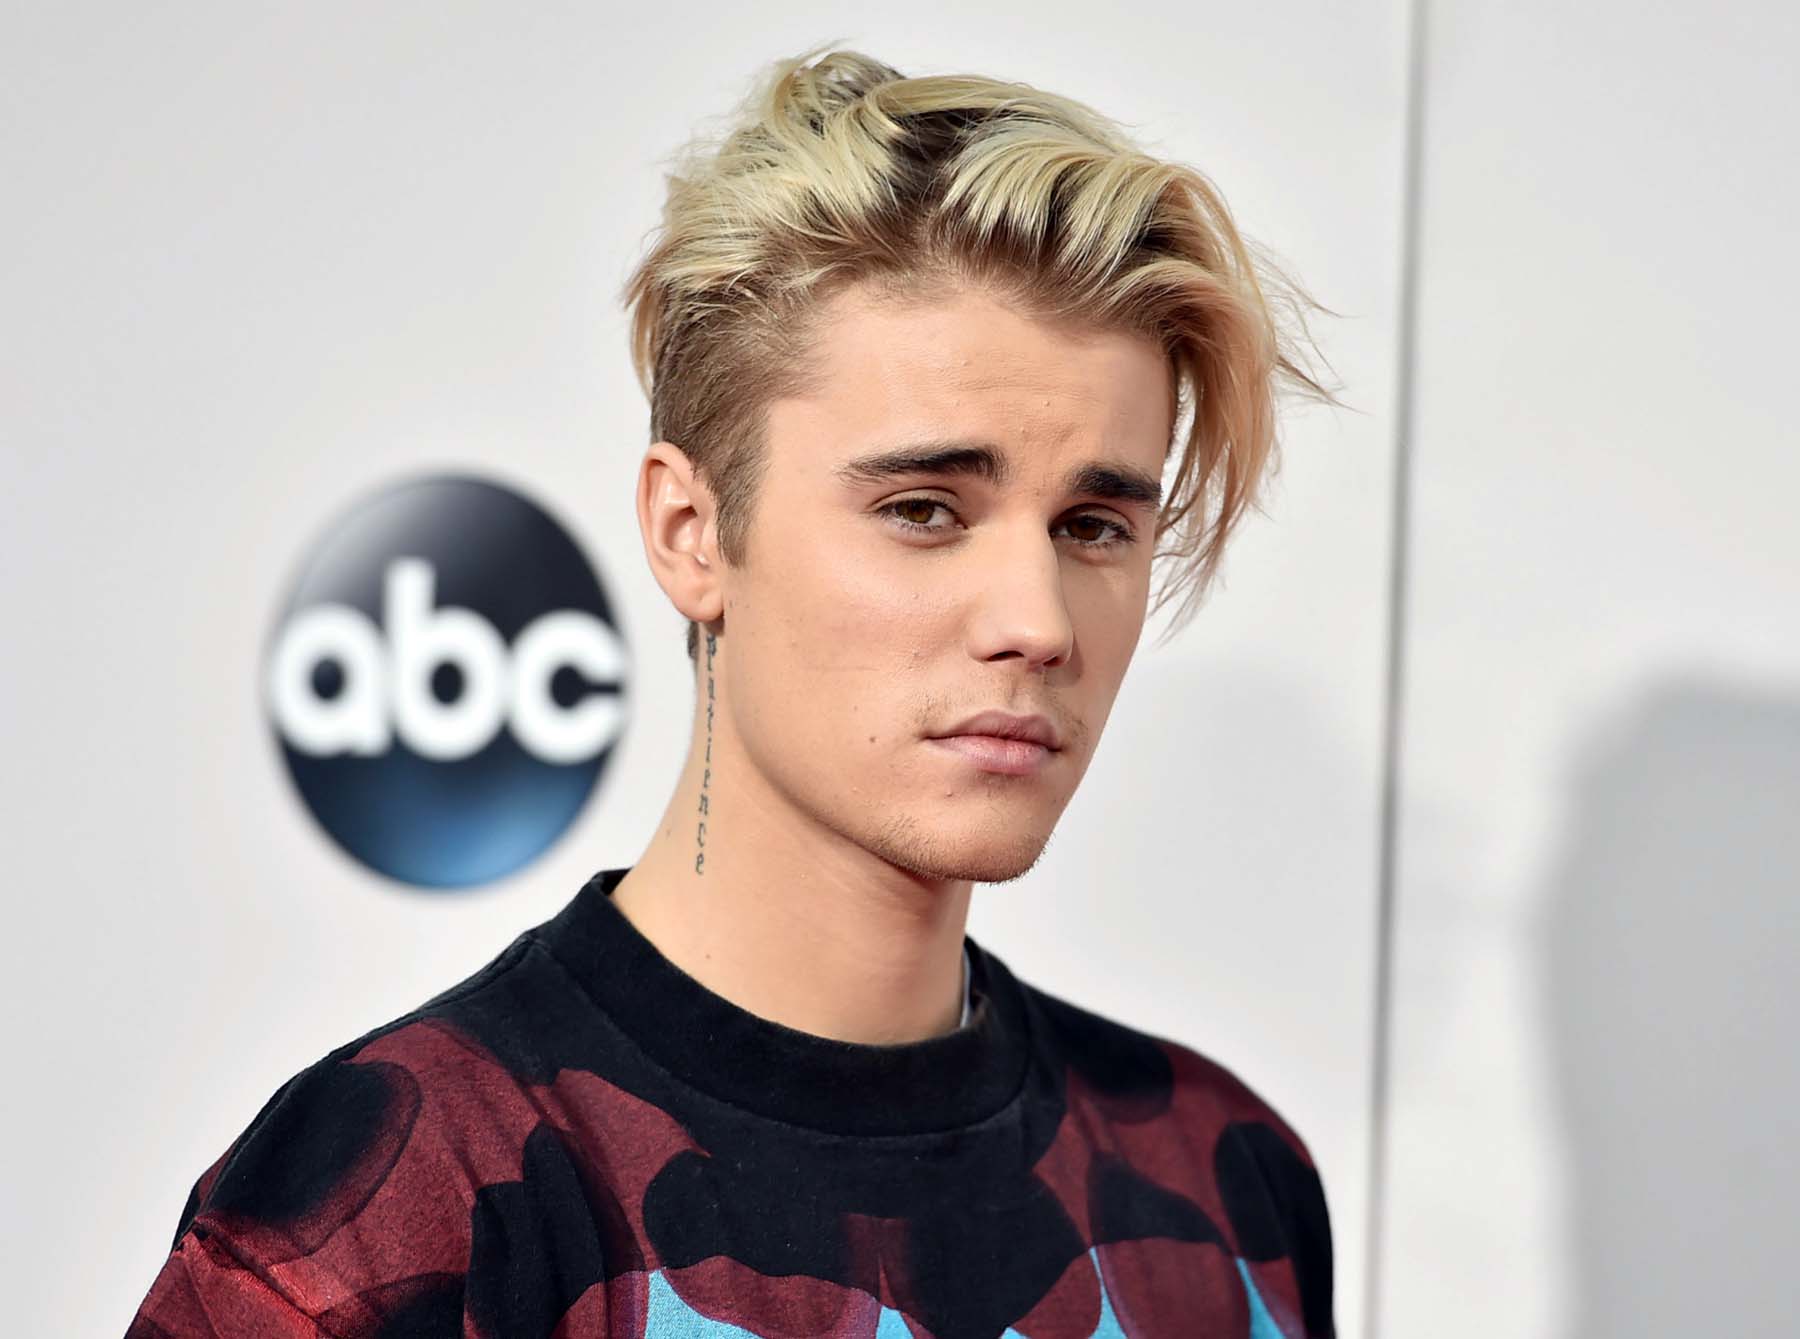 Justin bieber new hair color Hair is our crown